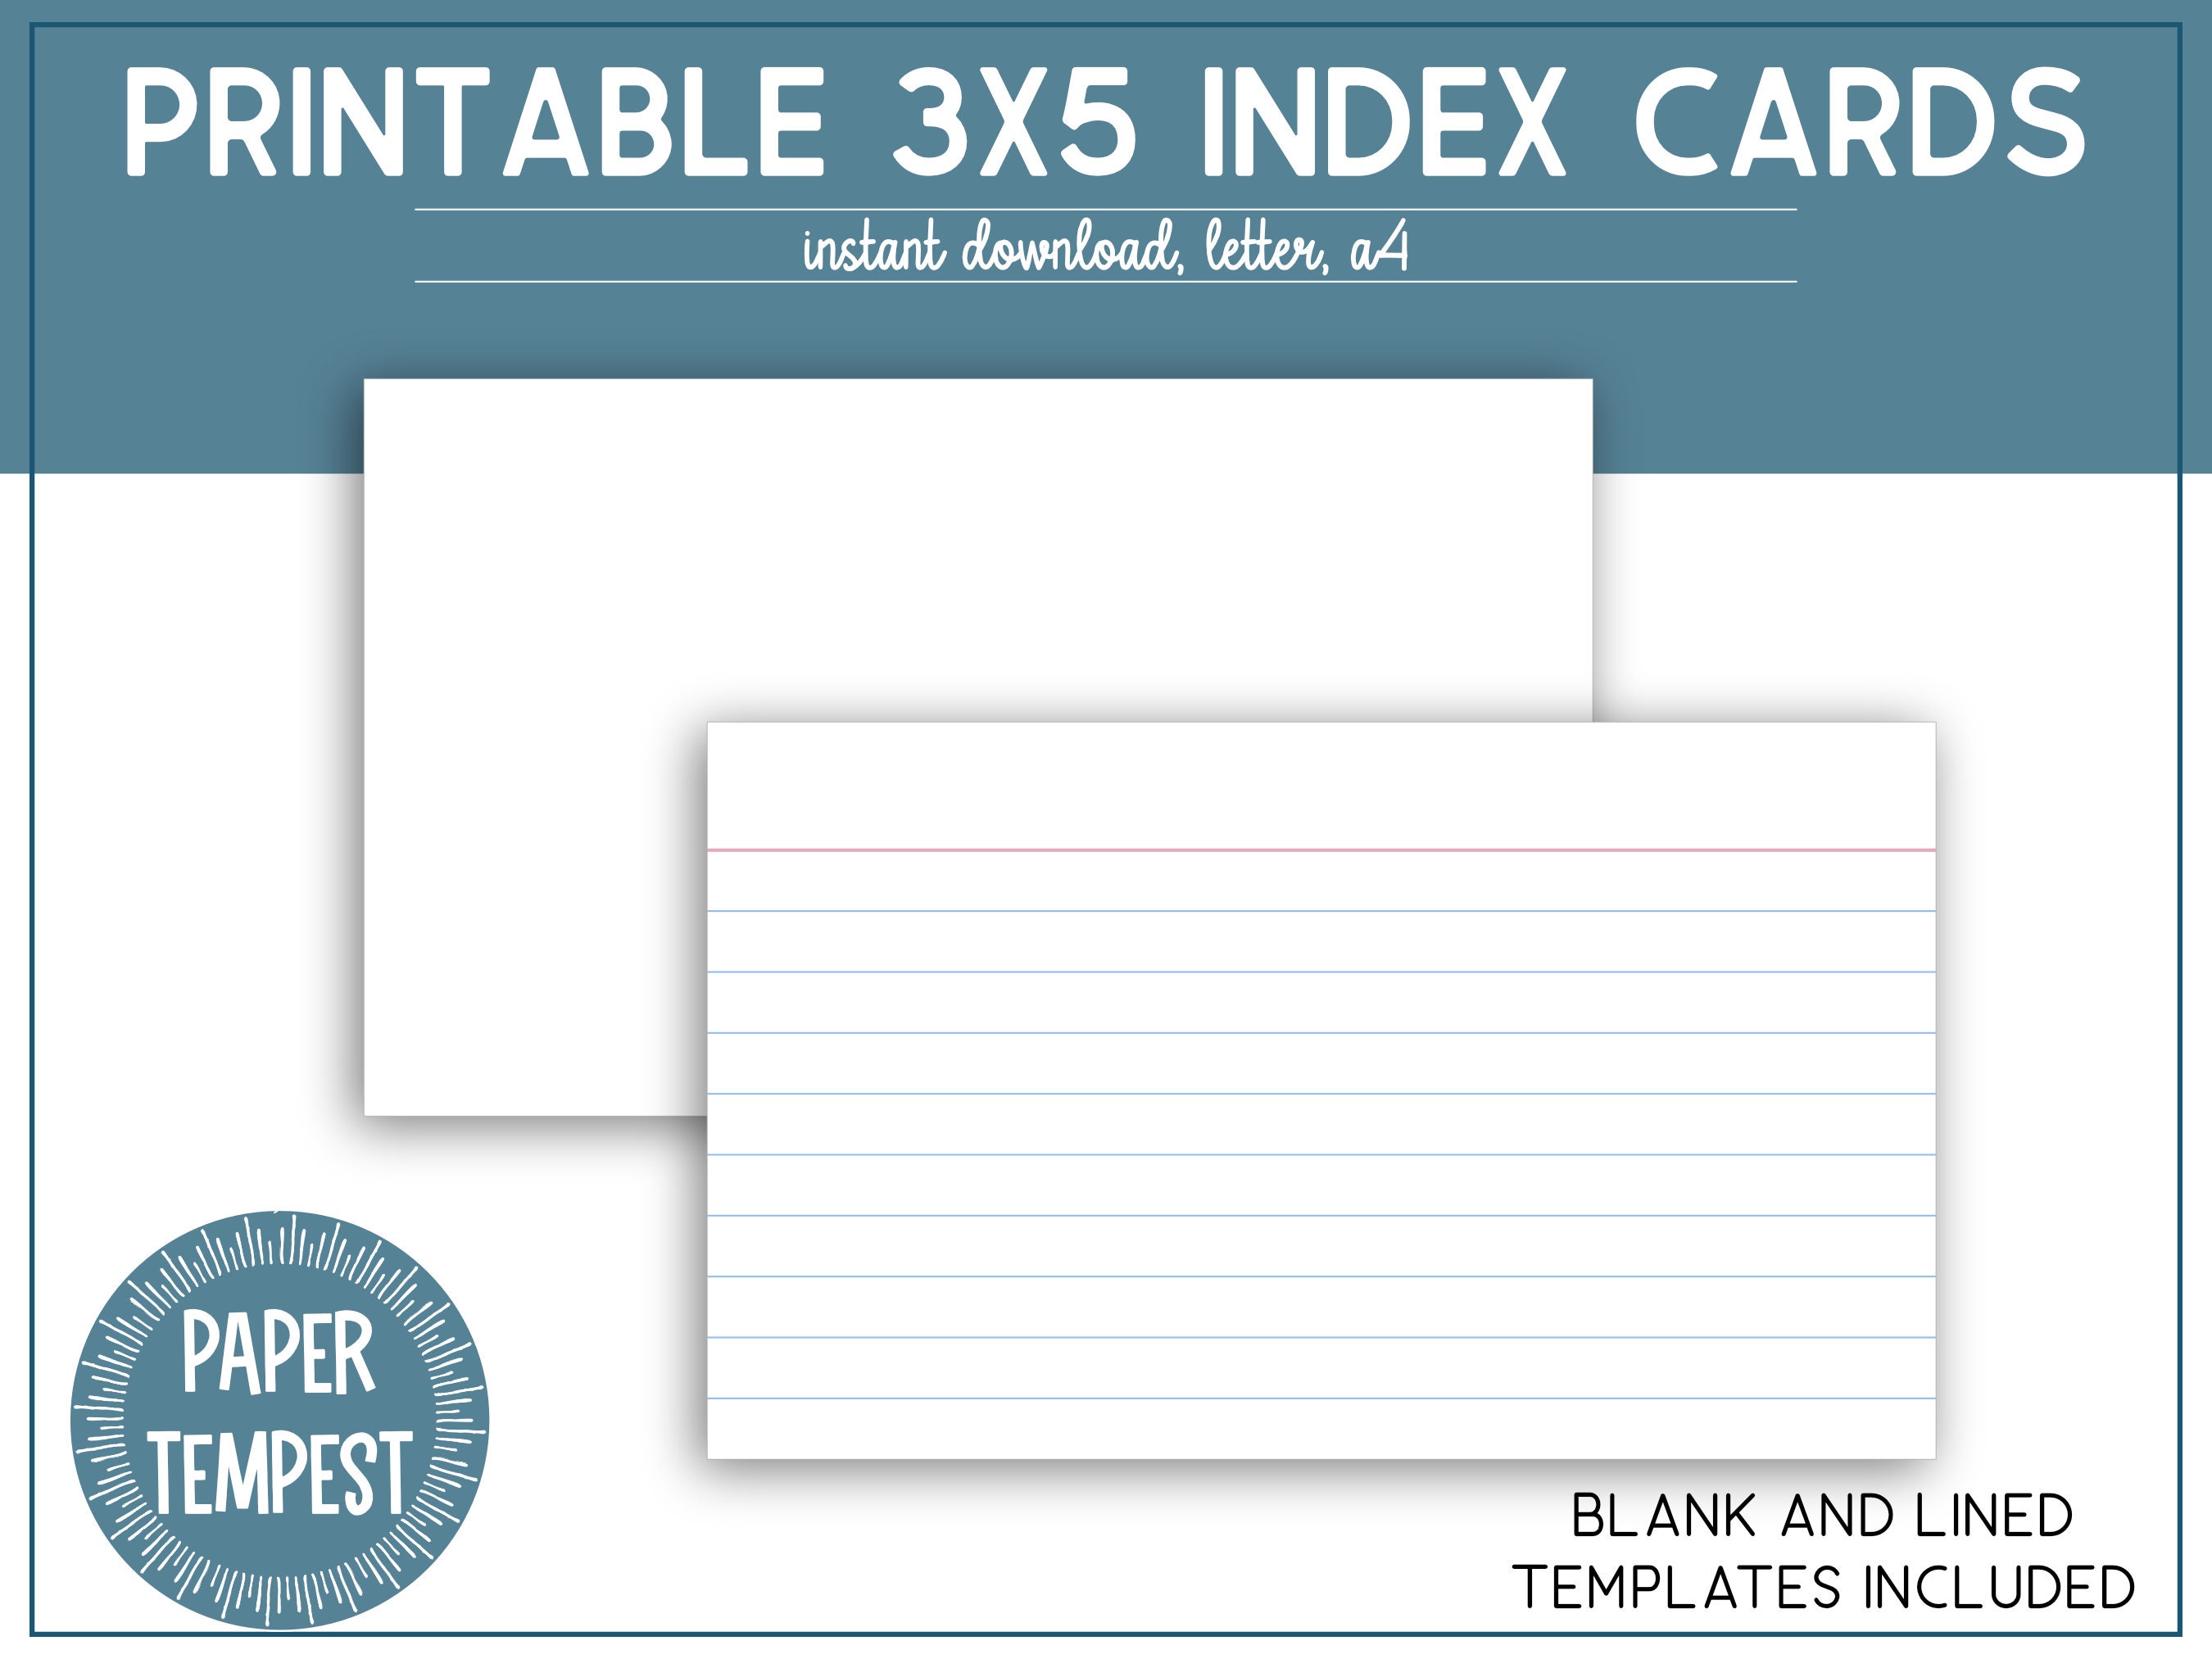 PrintWorks - Templates for Index Cards, Flash Cards, Postcards and more!